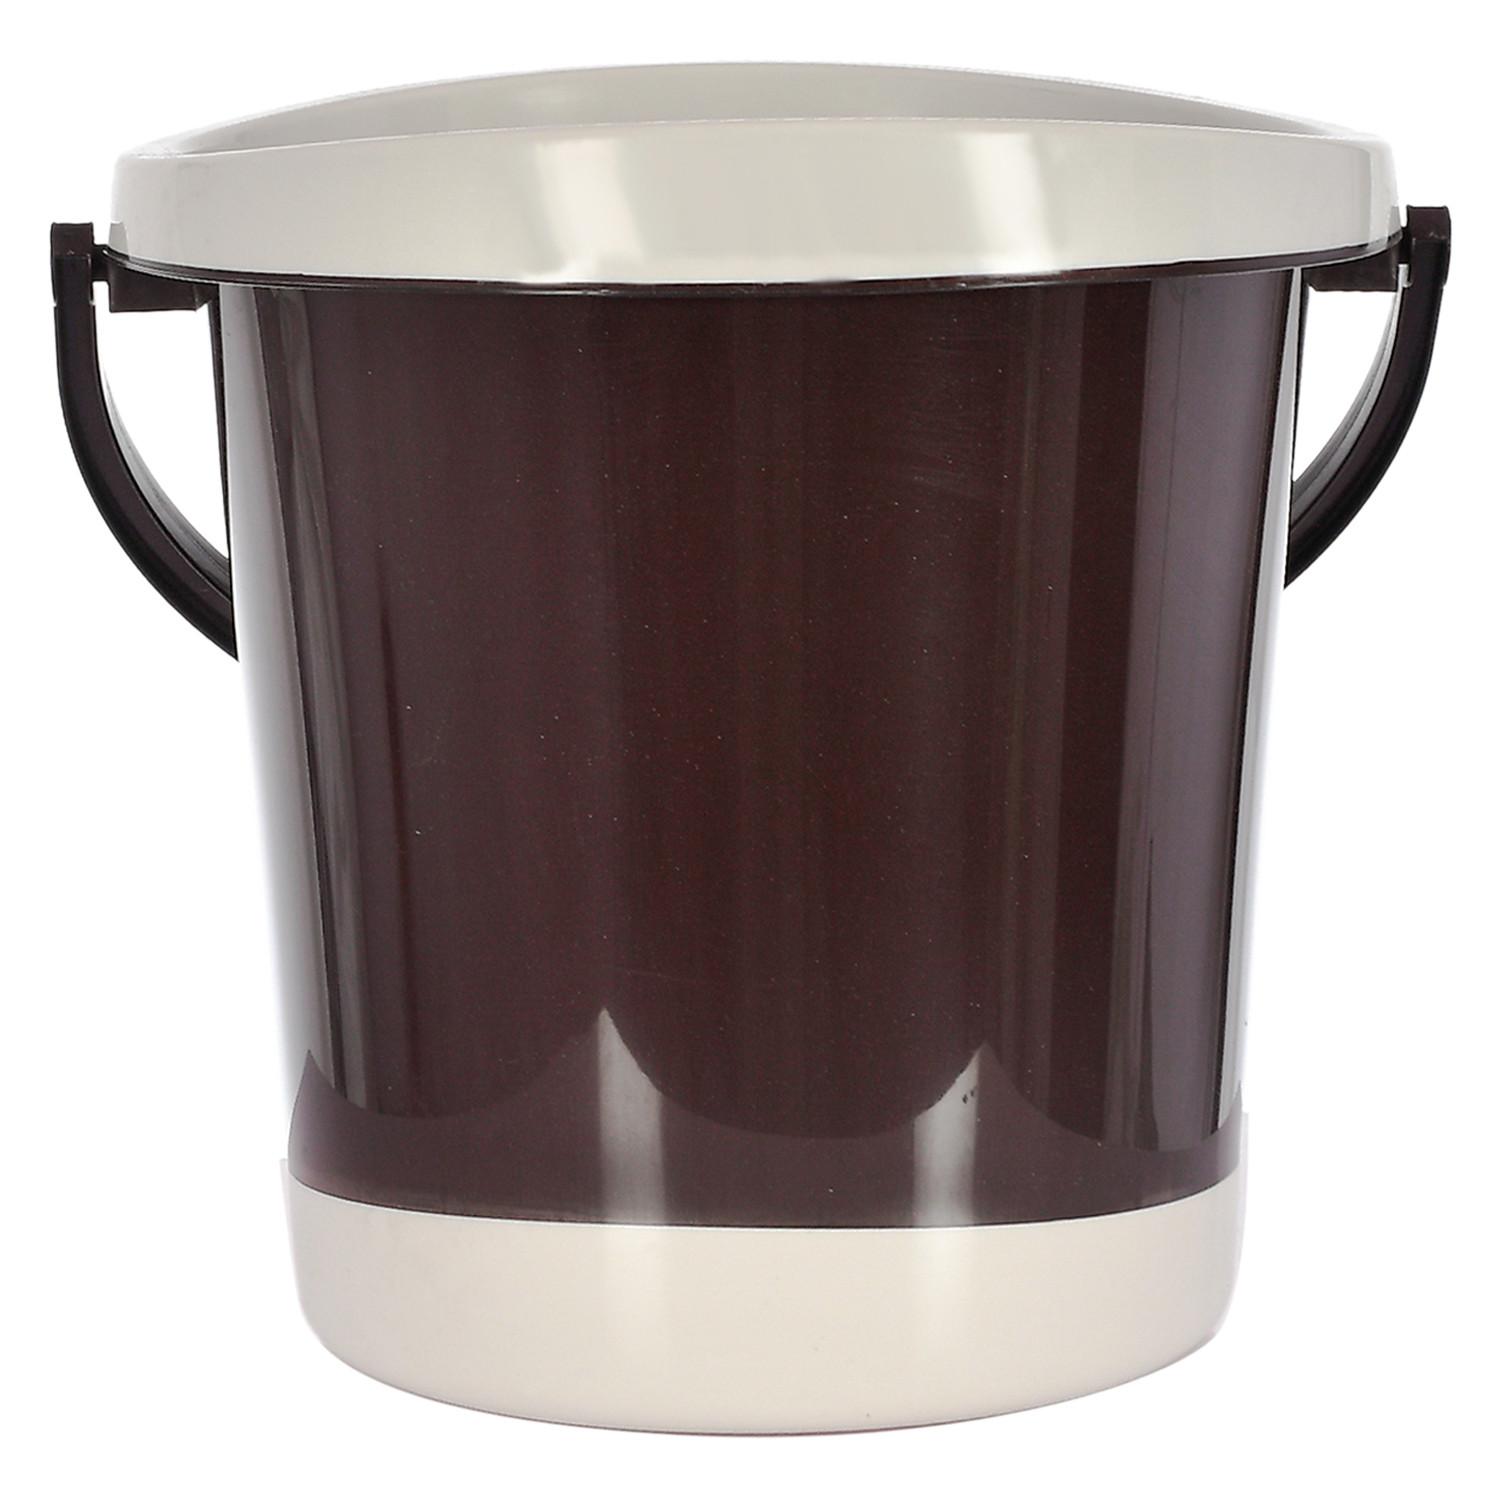 Kuber Industries Multiuses Plastic Bucket With Handle, 18 litre- Pack of 2 (Grey & Brown)-46KM0367